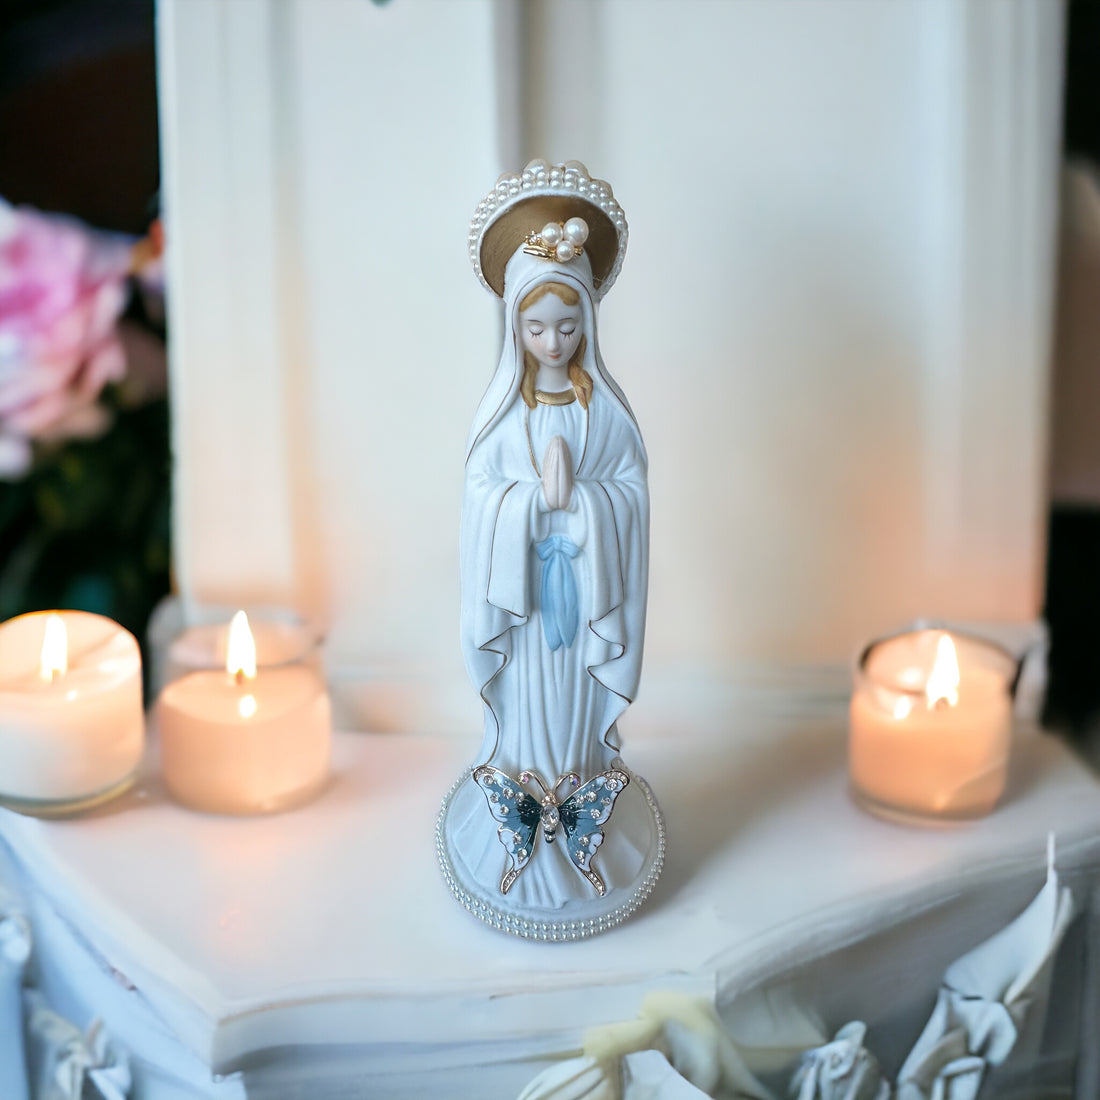 virgin mary, our lady of betania, our lady of fatima statue, our lady virgin mary art, catholic art, catholic statue, mary statue, mary figurine, mary porcelain, our lady of lourdes, our lady of guadalupe, catholic gifts, easter gifts, lent gift, baptism gift, christening gift, mother mary statue, catholic gifts for her